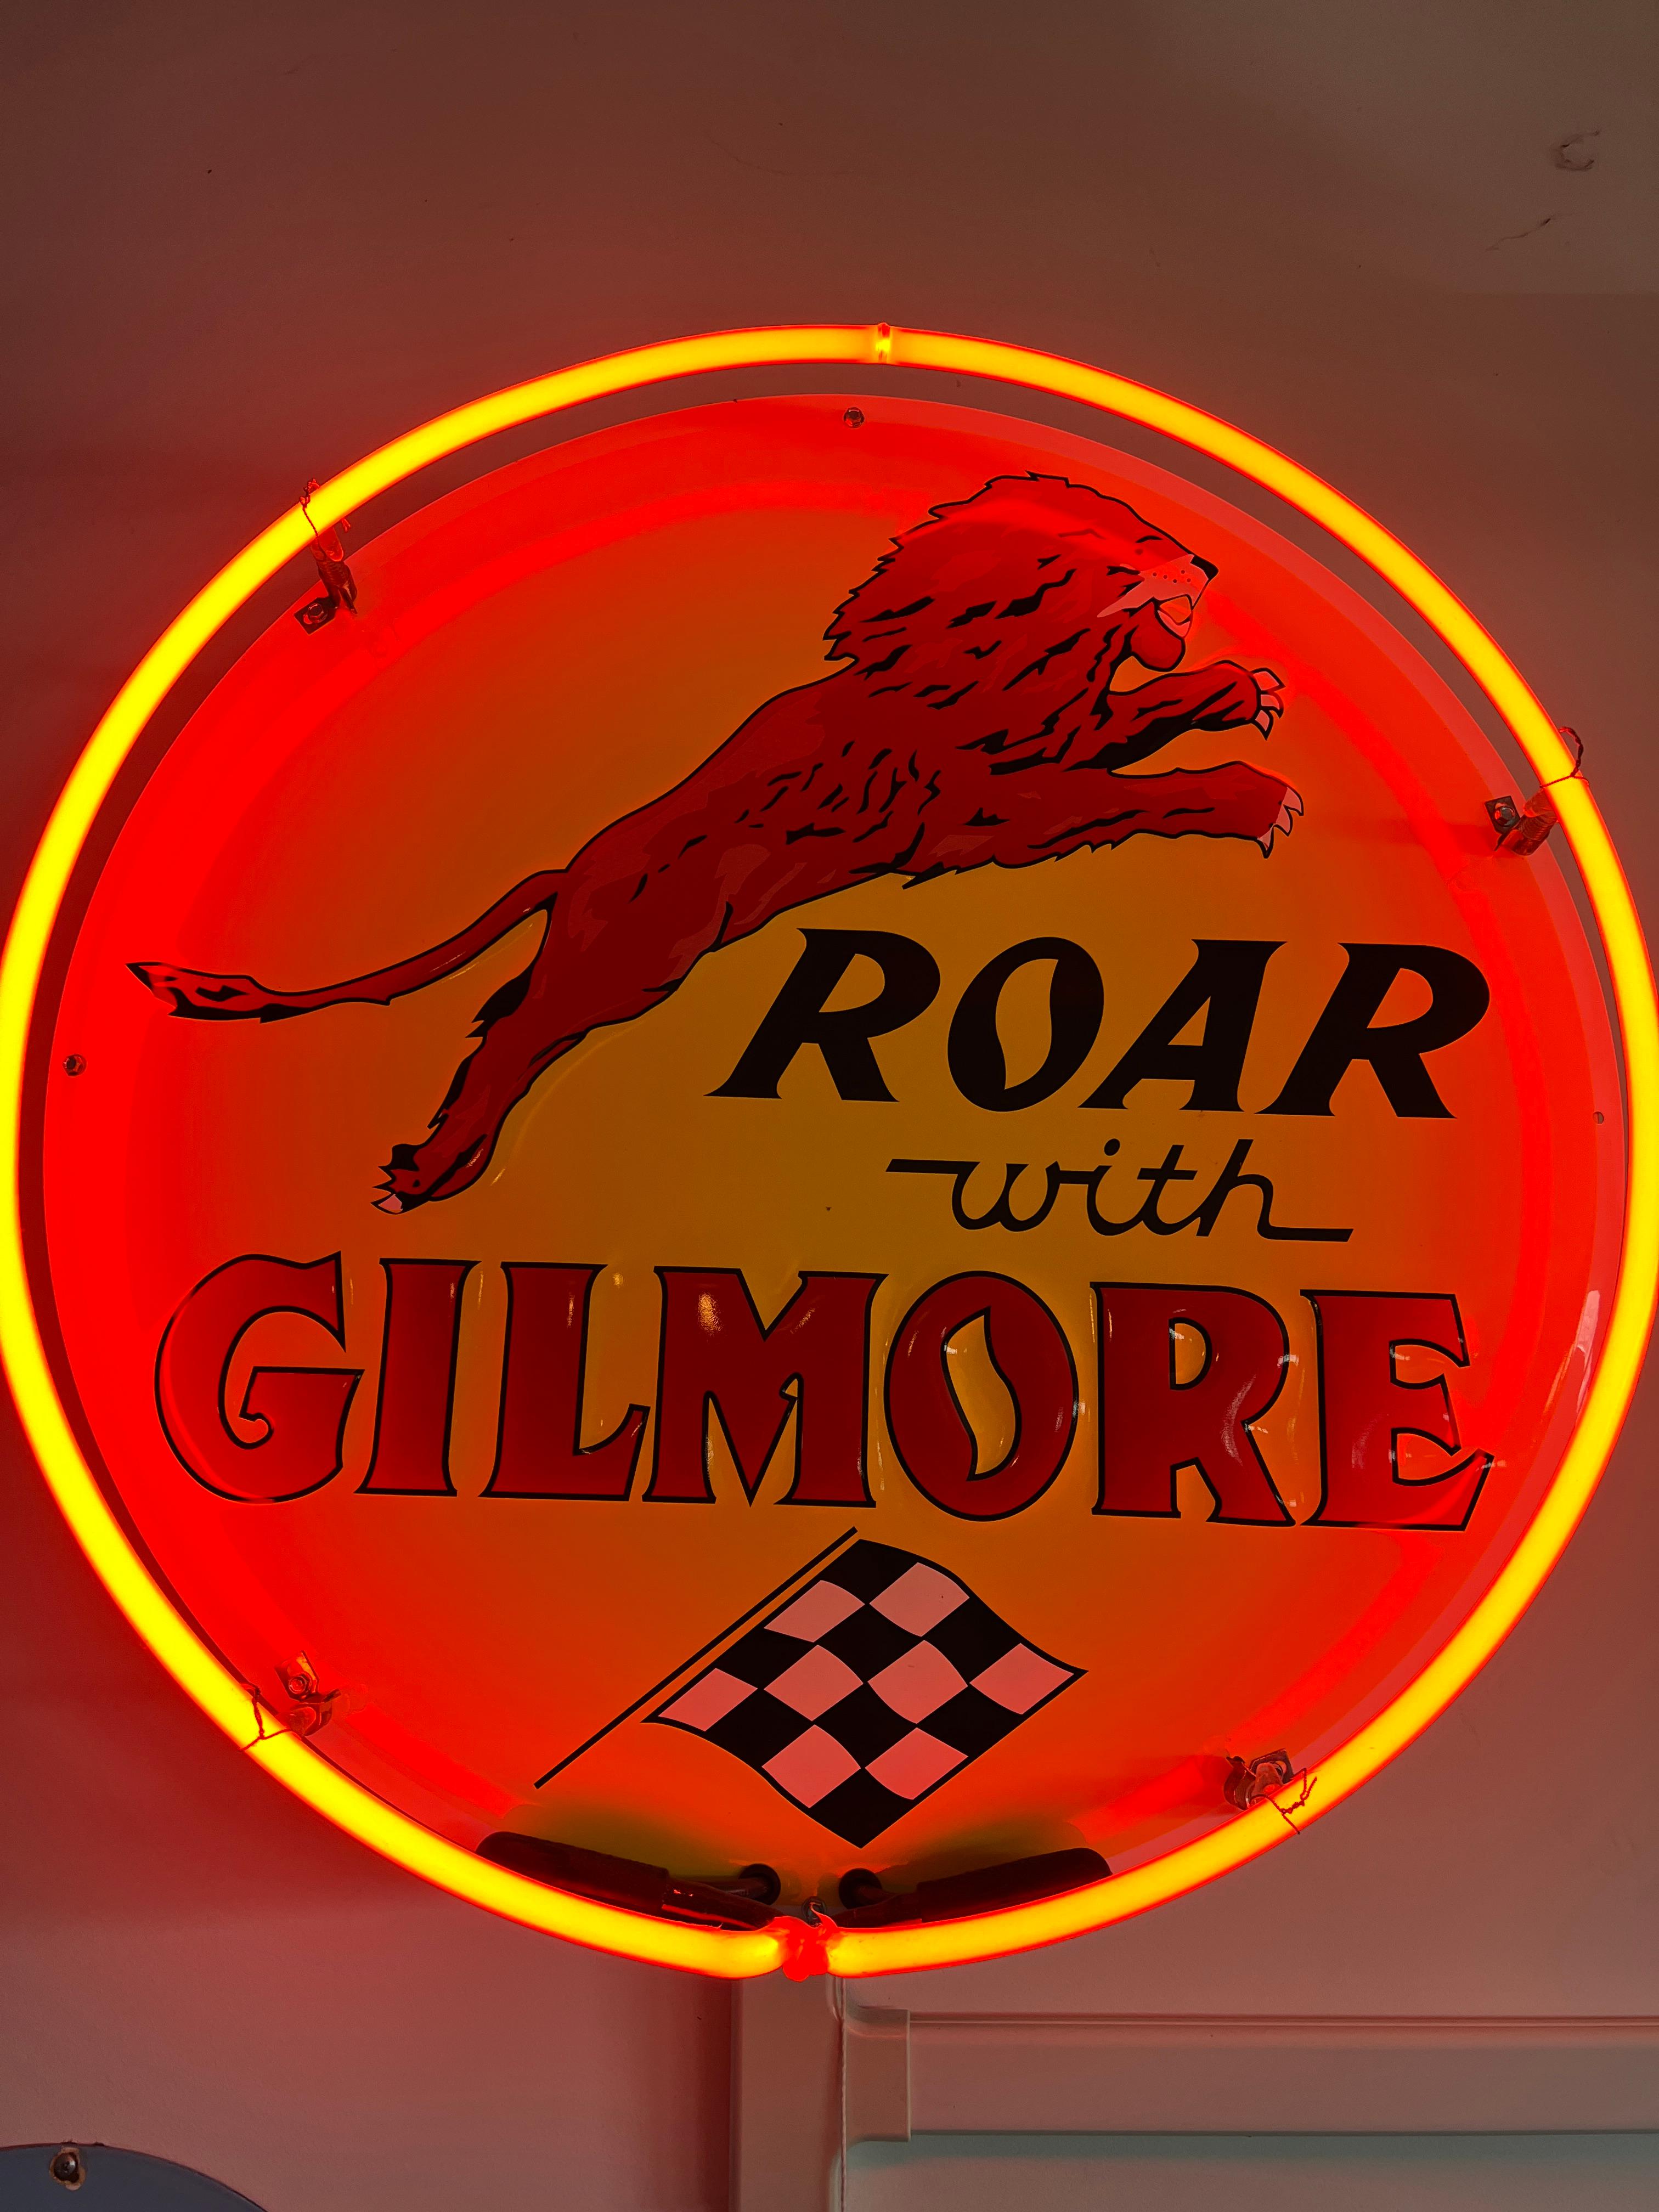 ROAR with GILMORE racing neon lighted sigh in excellent condition